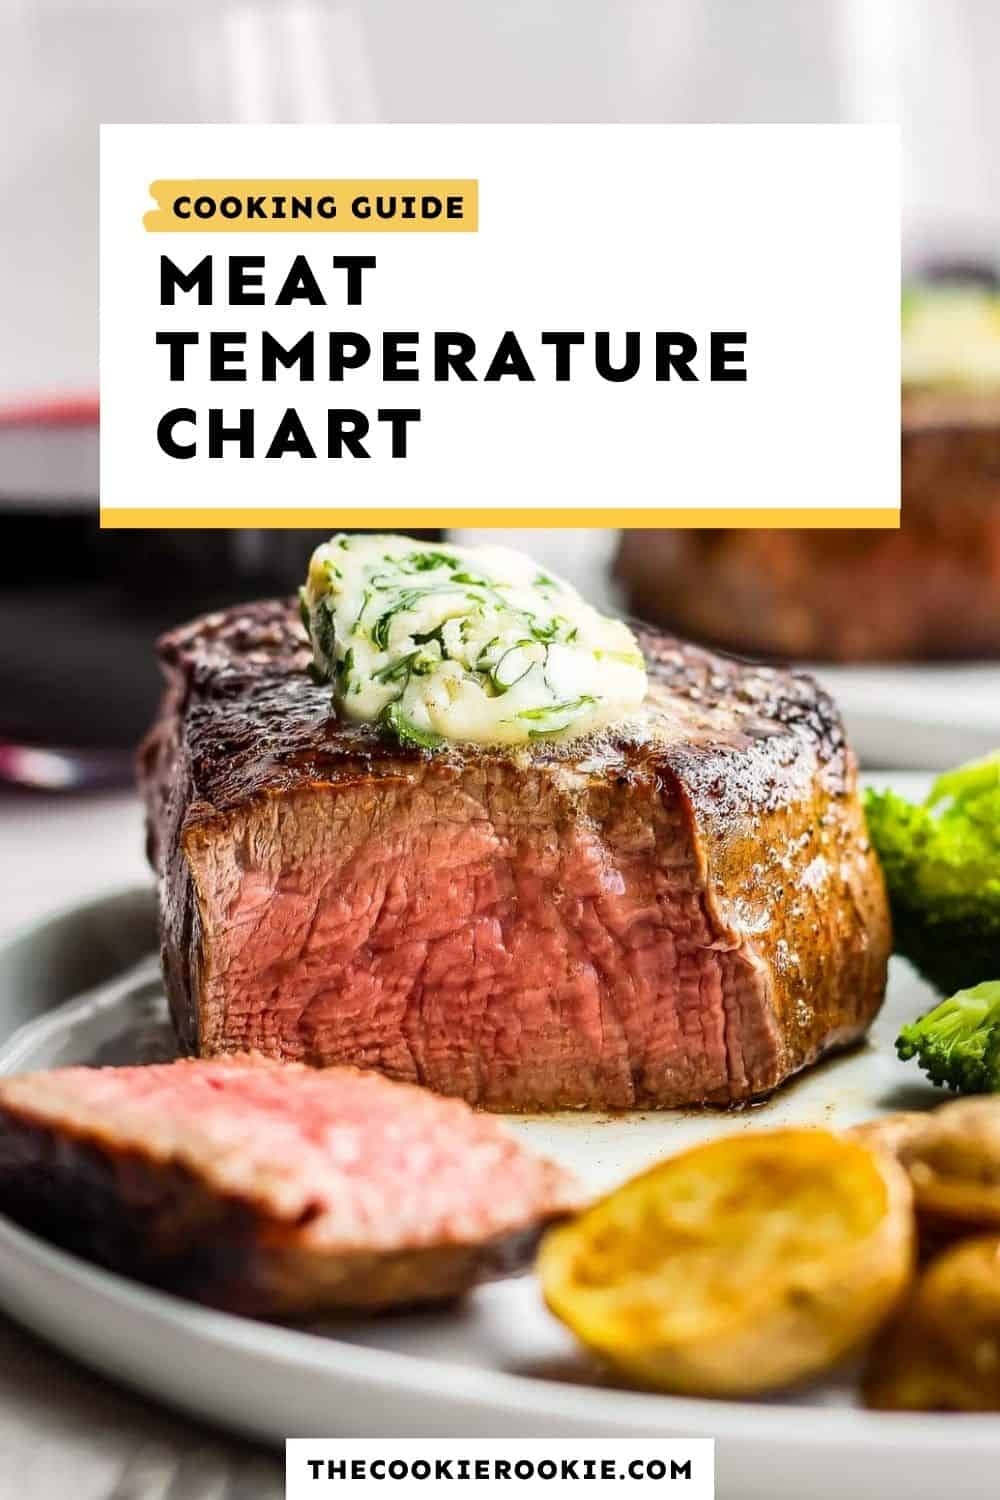 https://www.thecookierookie.com/wp-content/uploads/2017/07/meat-temperature-guide.jpg